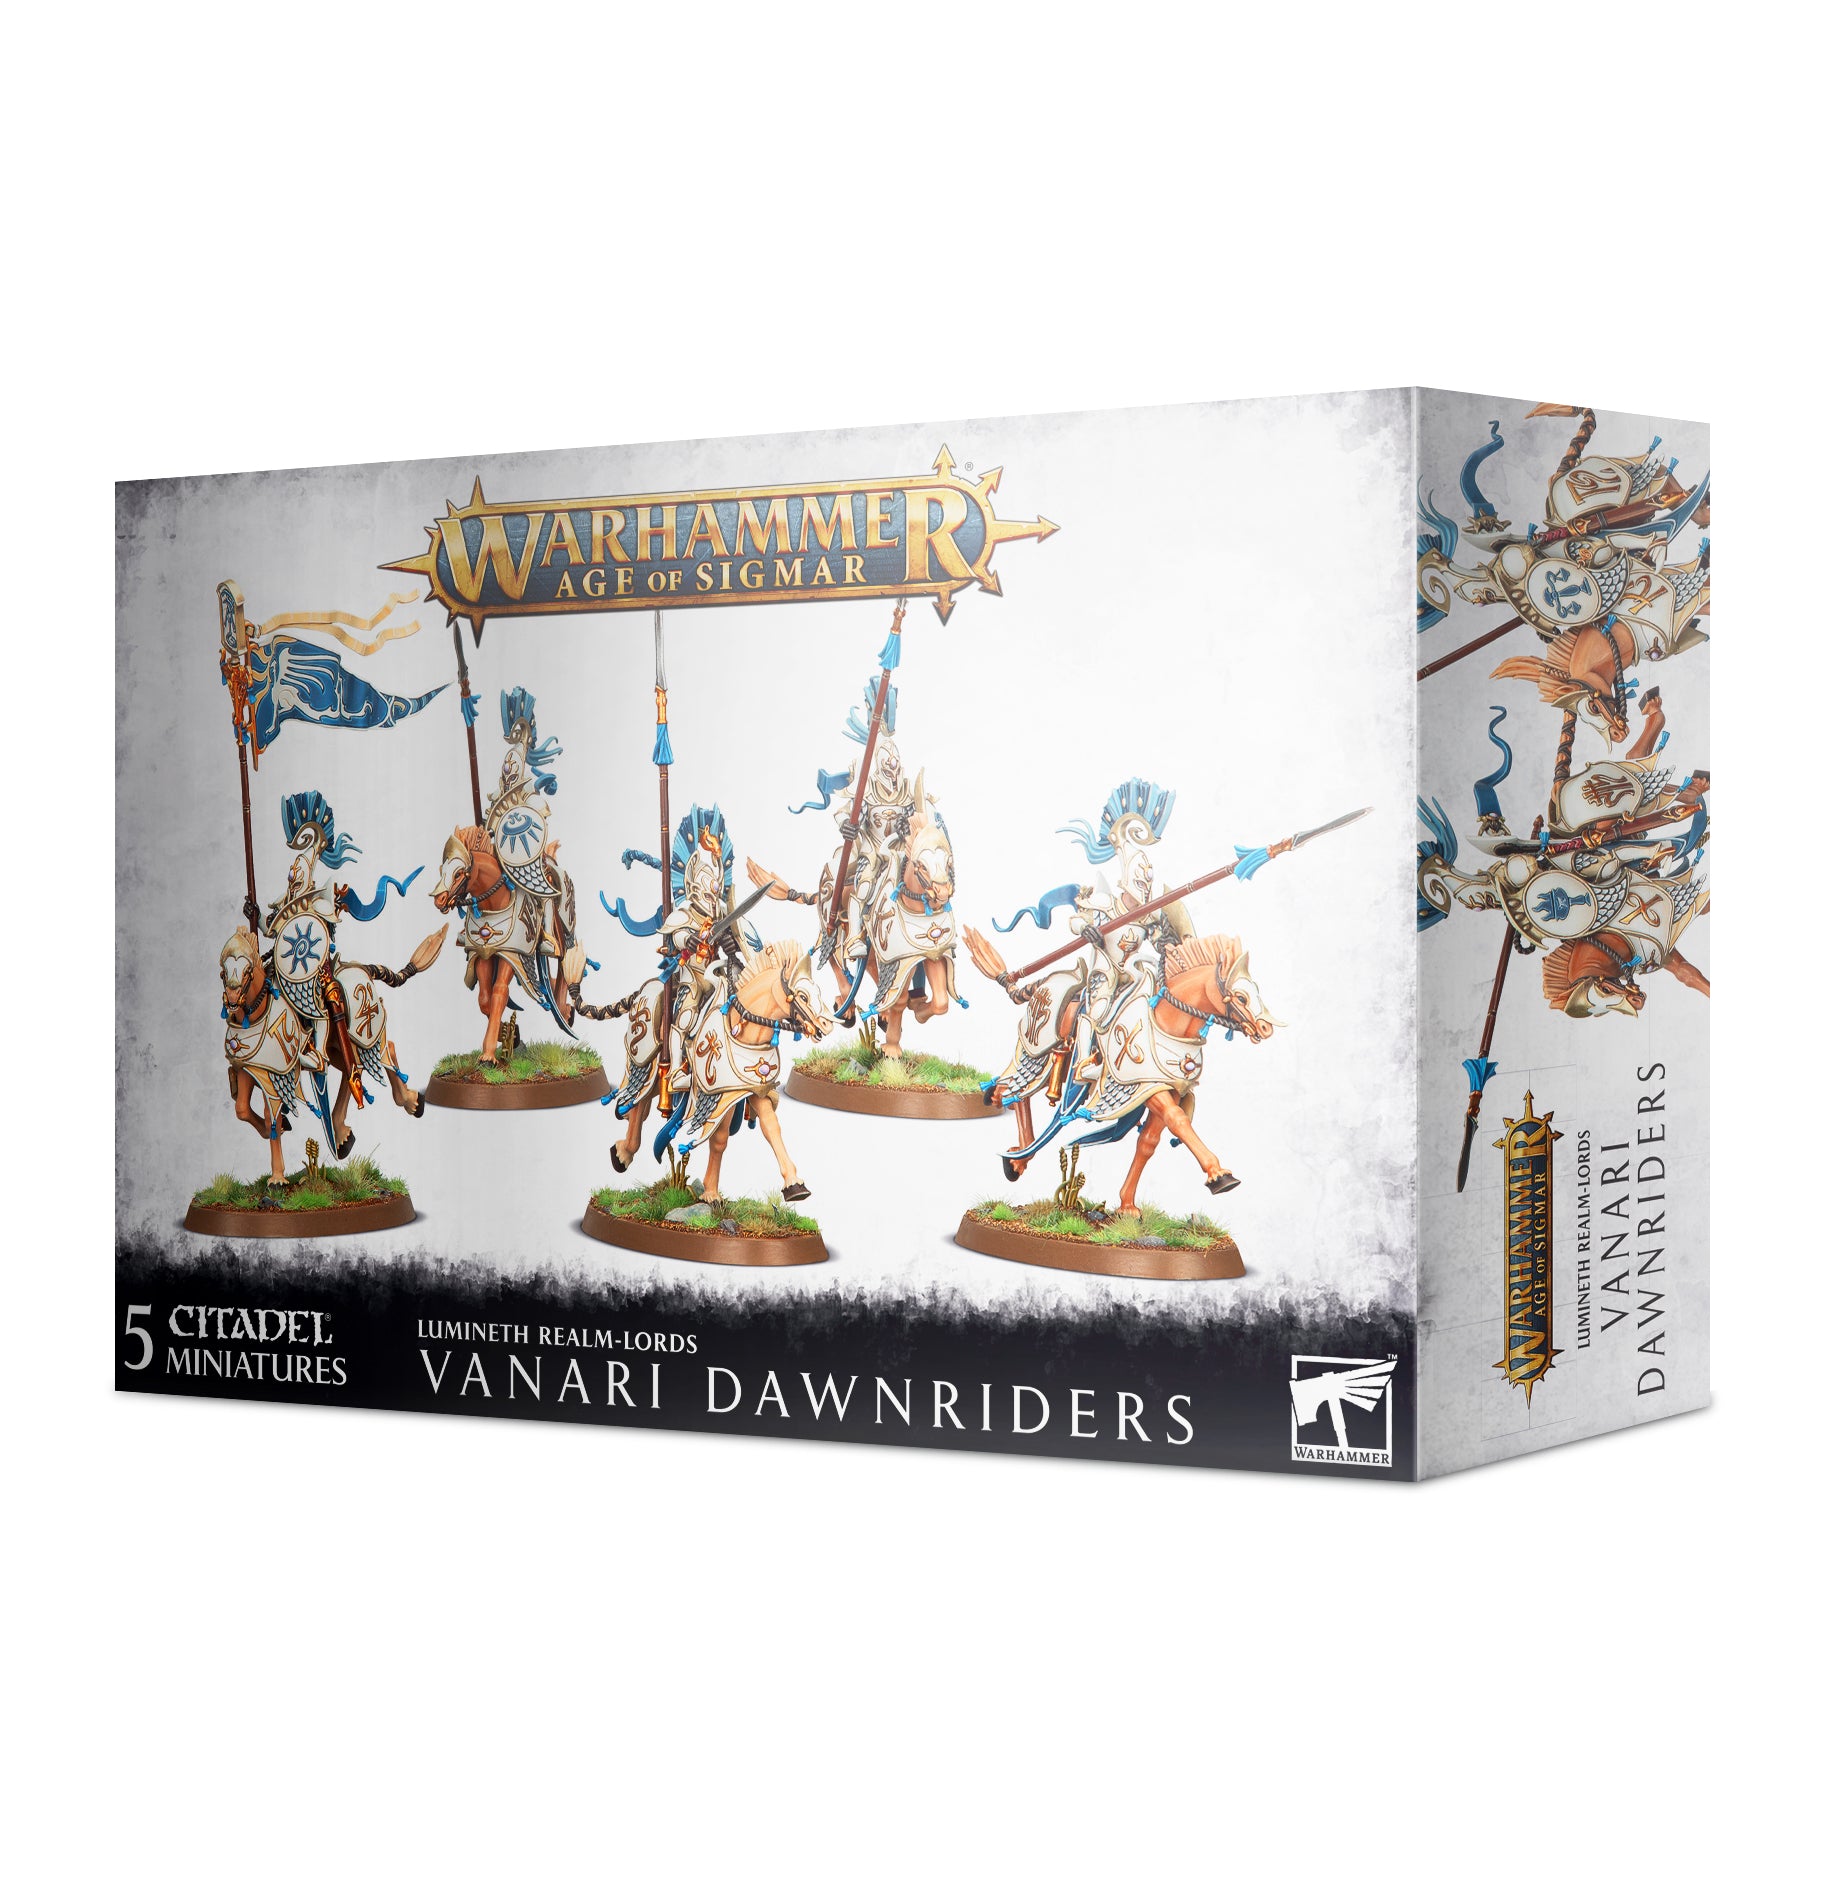 LUMINETH REALM-LORDS: VANARI DAWNRIDERS Realm-Lords Games Workshop    | Red Claw Gaming